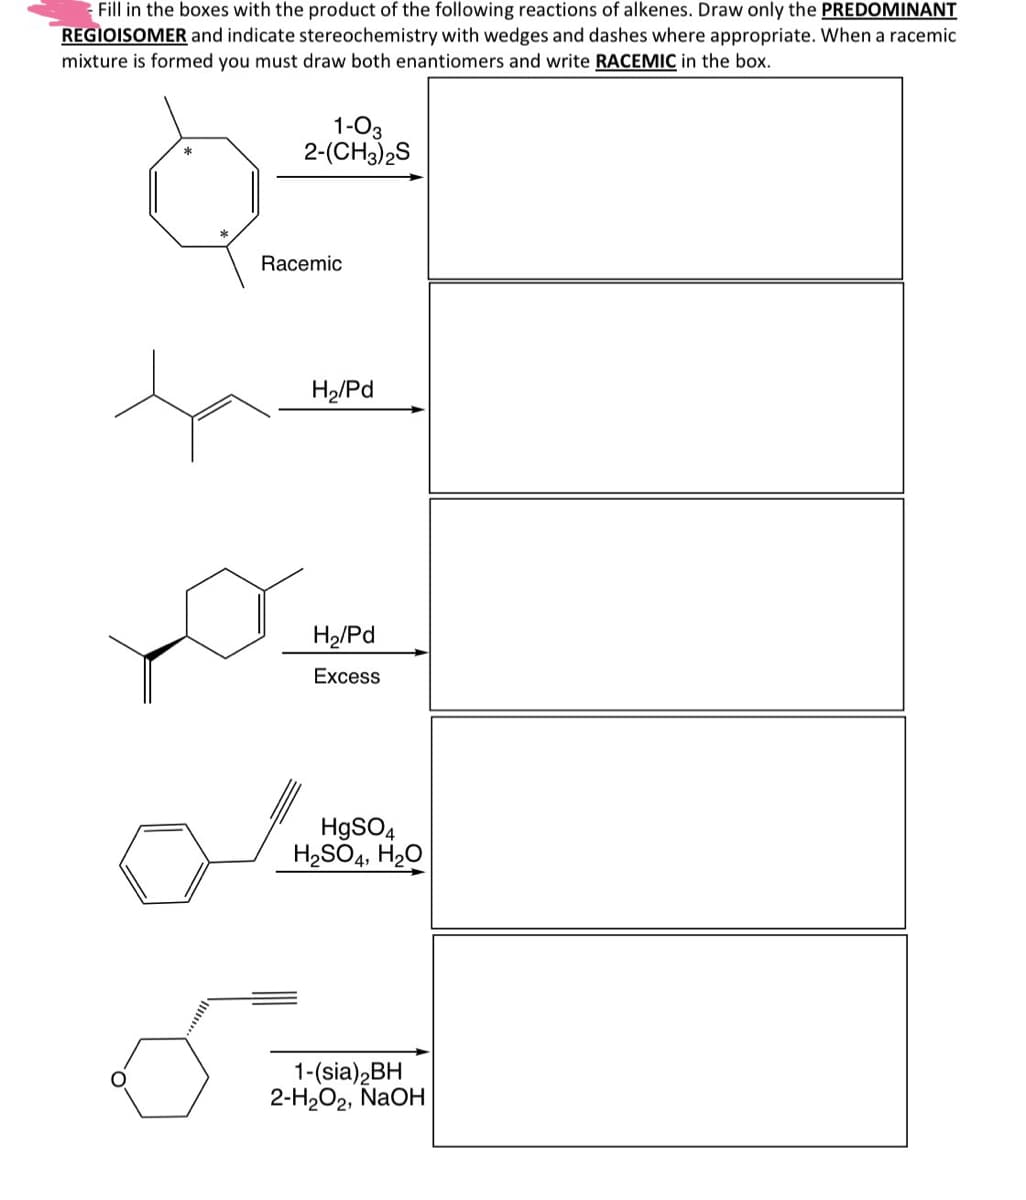 Fill in the boxes with the product of the following reactions of alkenes. Draw only the PREDOMINANT
REGIOISOMER and indicate stereochemistry with wedges and dashes where appropriate. When a racemic
mixture is formed you must draw both enantiomers and write RACEMIC in the box.
1-03
2-(CH3)2S
Racemic
H2/Pd
H2/Pd
Excess
HgSO4
H2SO4, H₂O
1-(sia)2BH
2-H2O2, NaOH